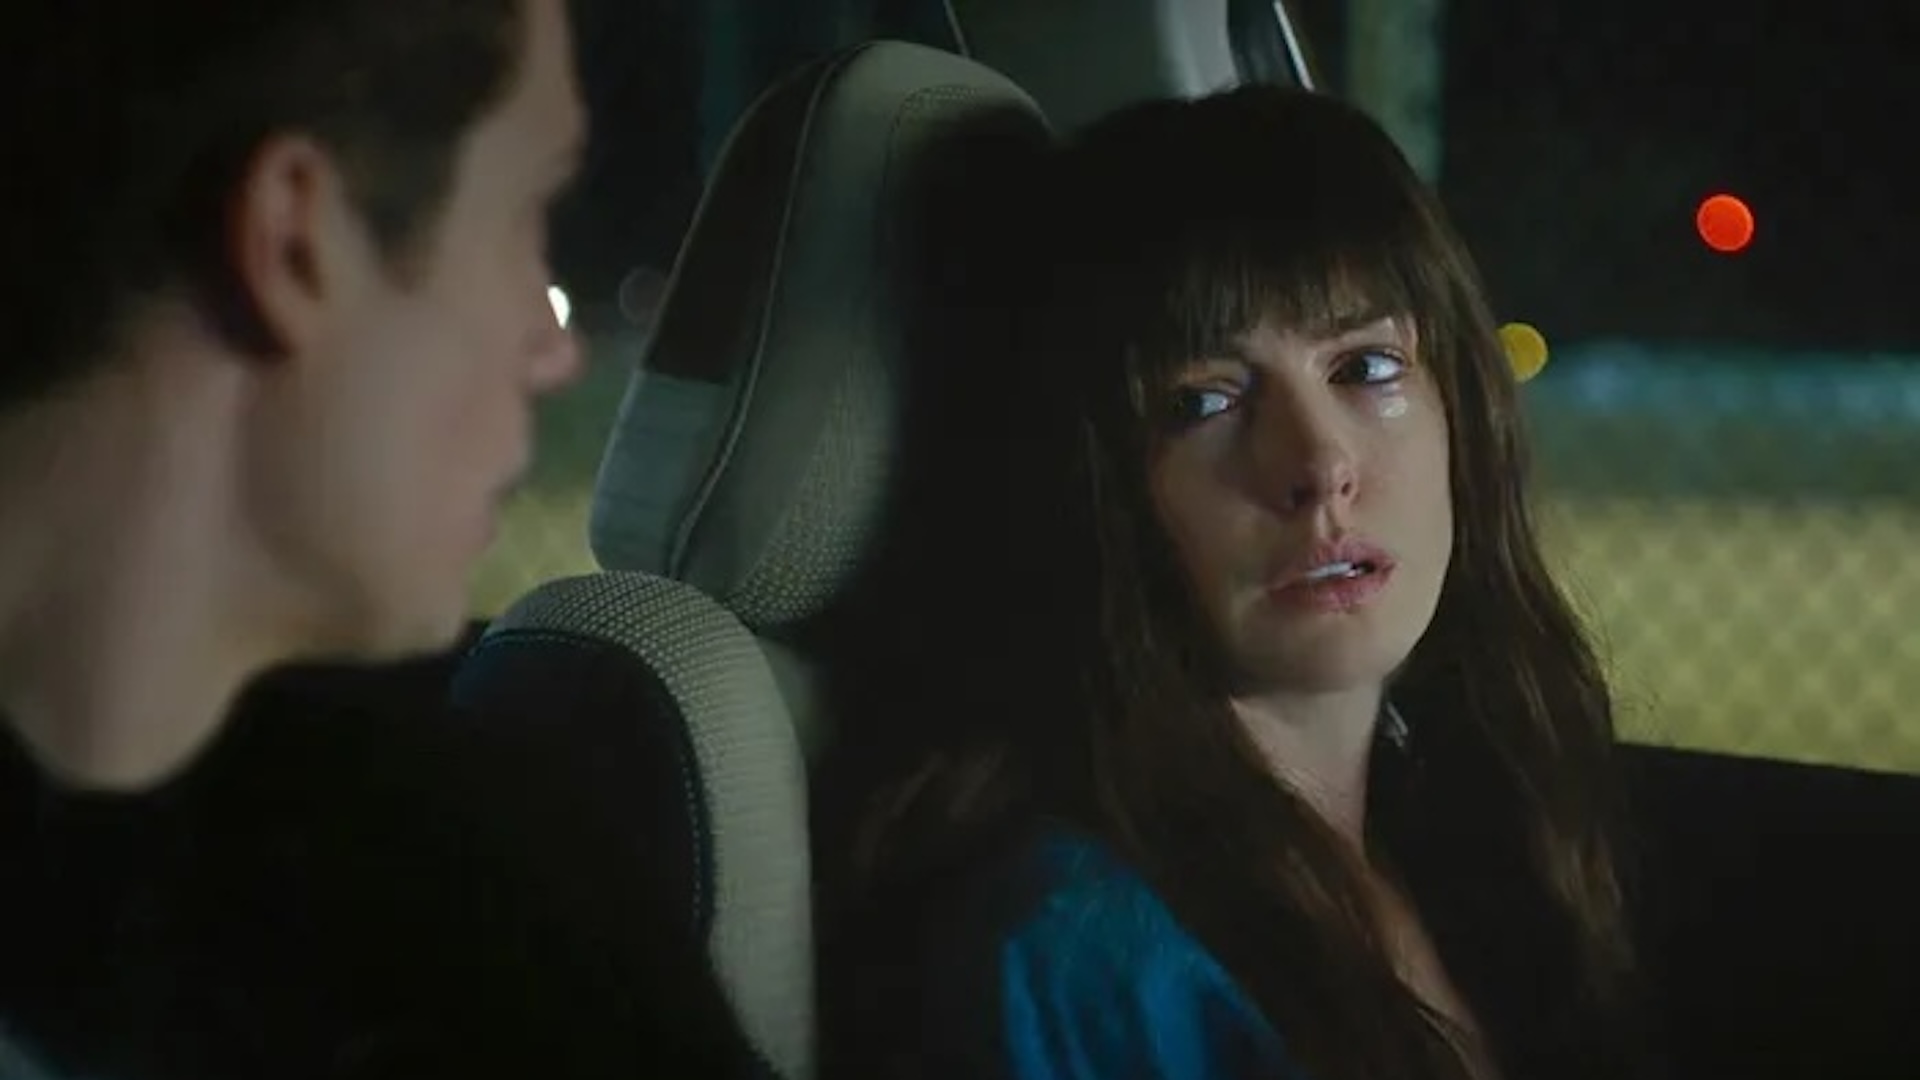 Anne Hatahway cries in her Subaru in a scene from The Idea of You